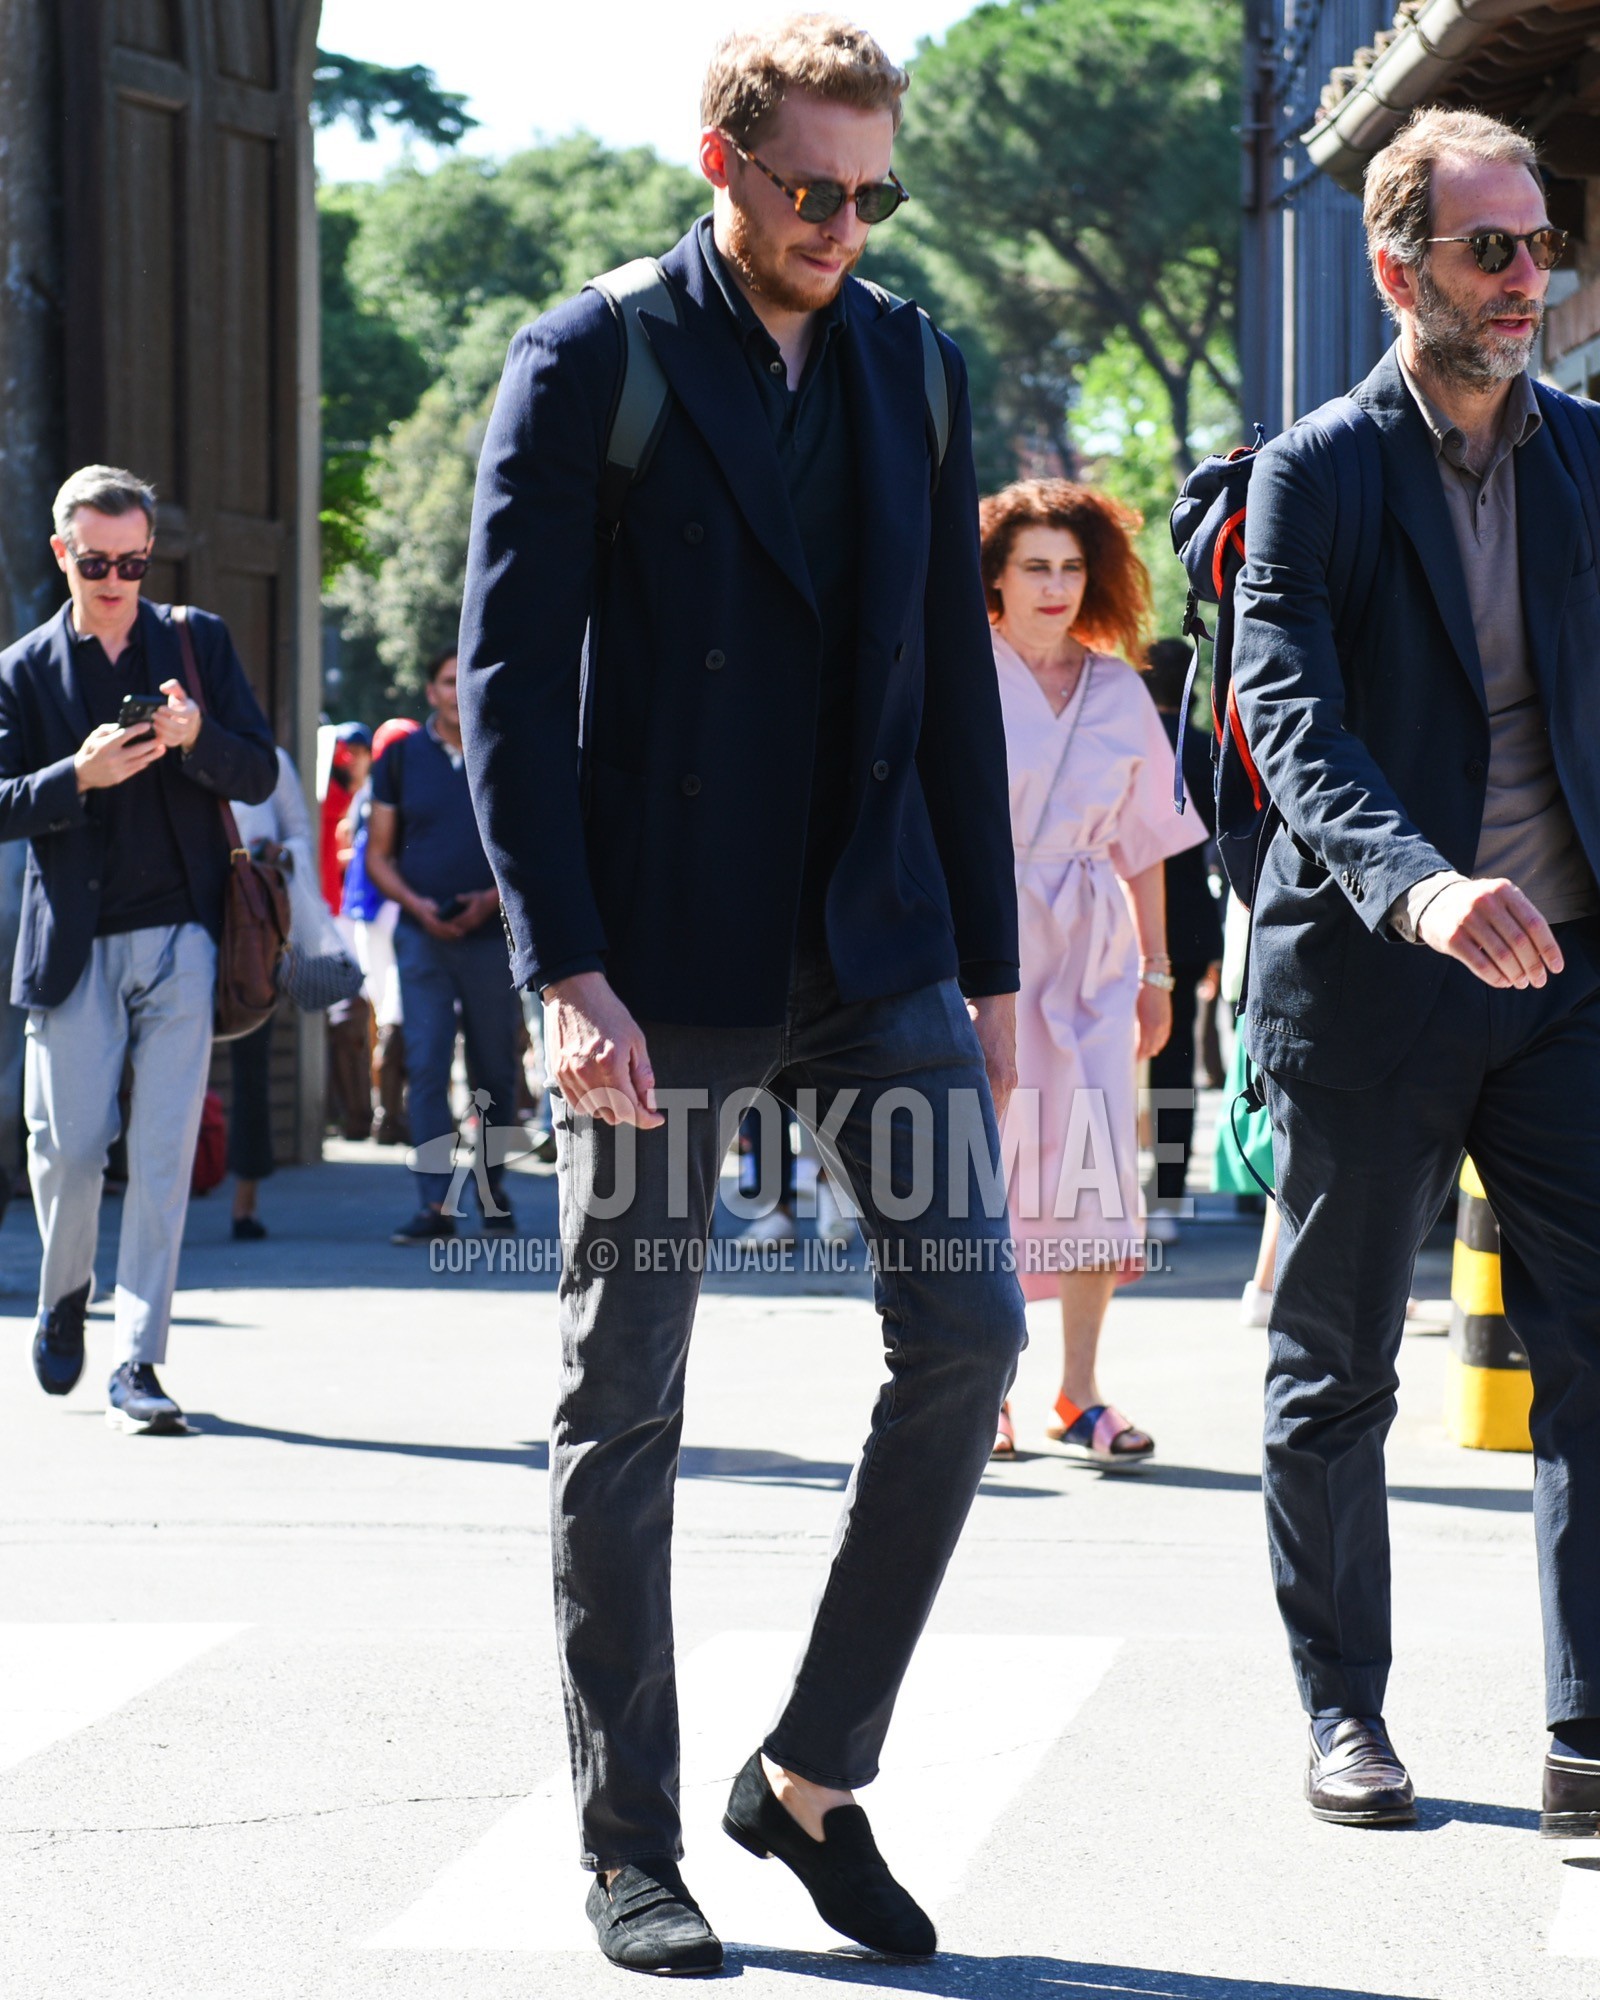 Men's spring summer outfit with brown tortoiseshell sunglasses, navy plain tailored jacket, black plain polo shirt, gray plain denim/jeans, black coin loafers leather shoes, black plain backpack.